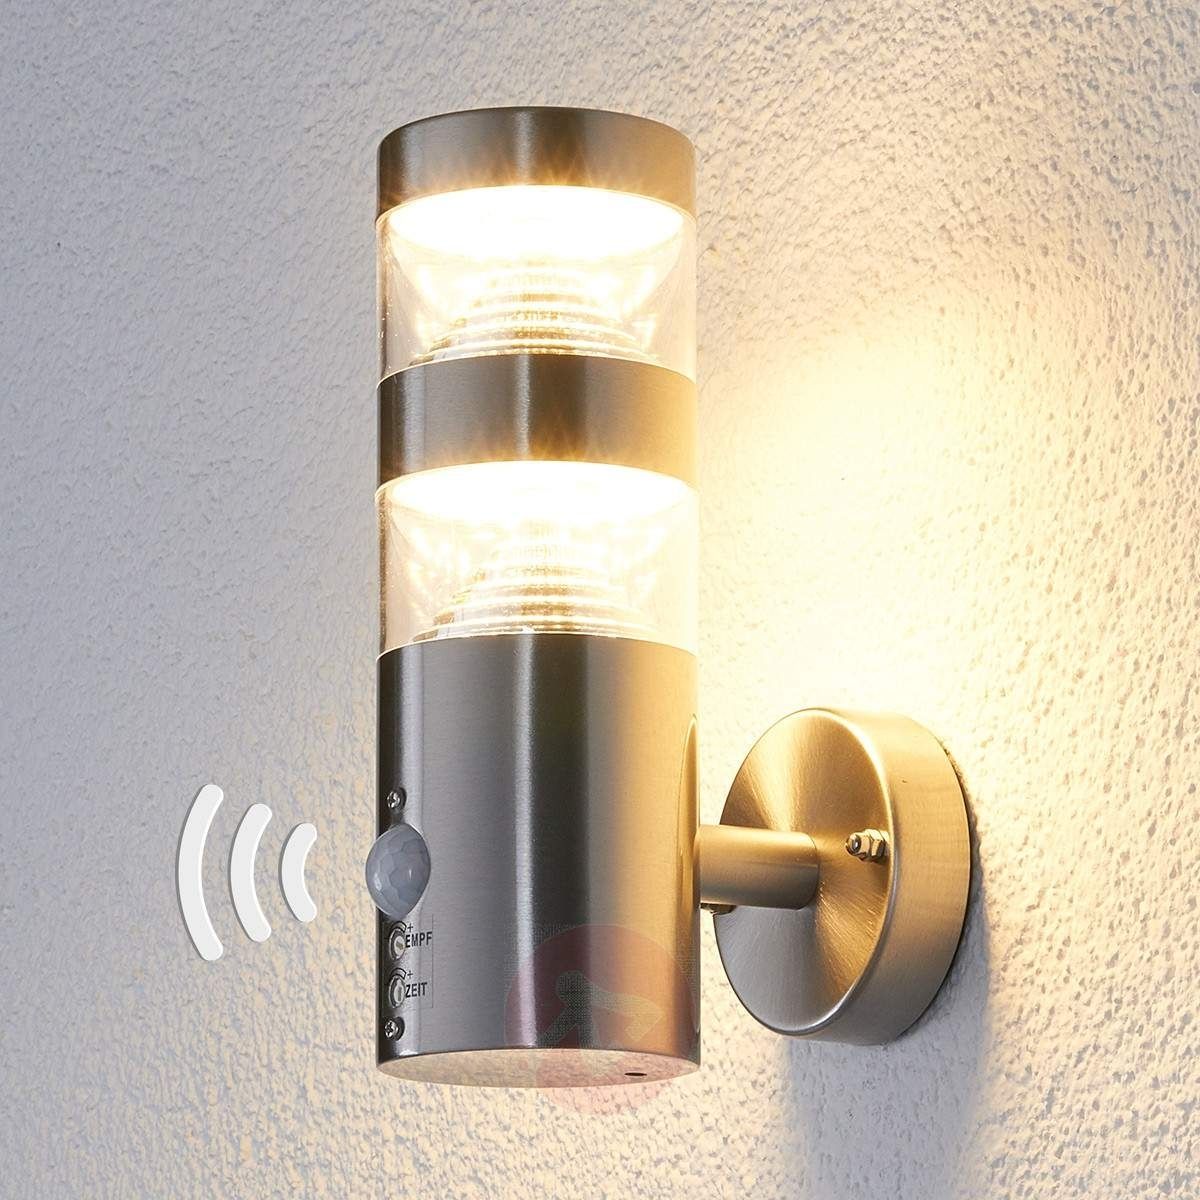 Led Outdoor Wall Light Lanea With Motion Sensor | Lights.co (View 7 of 15)